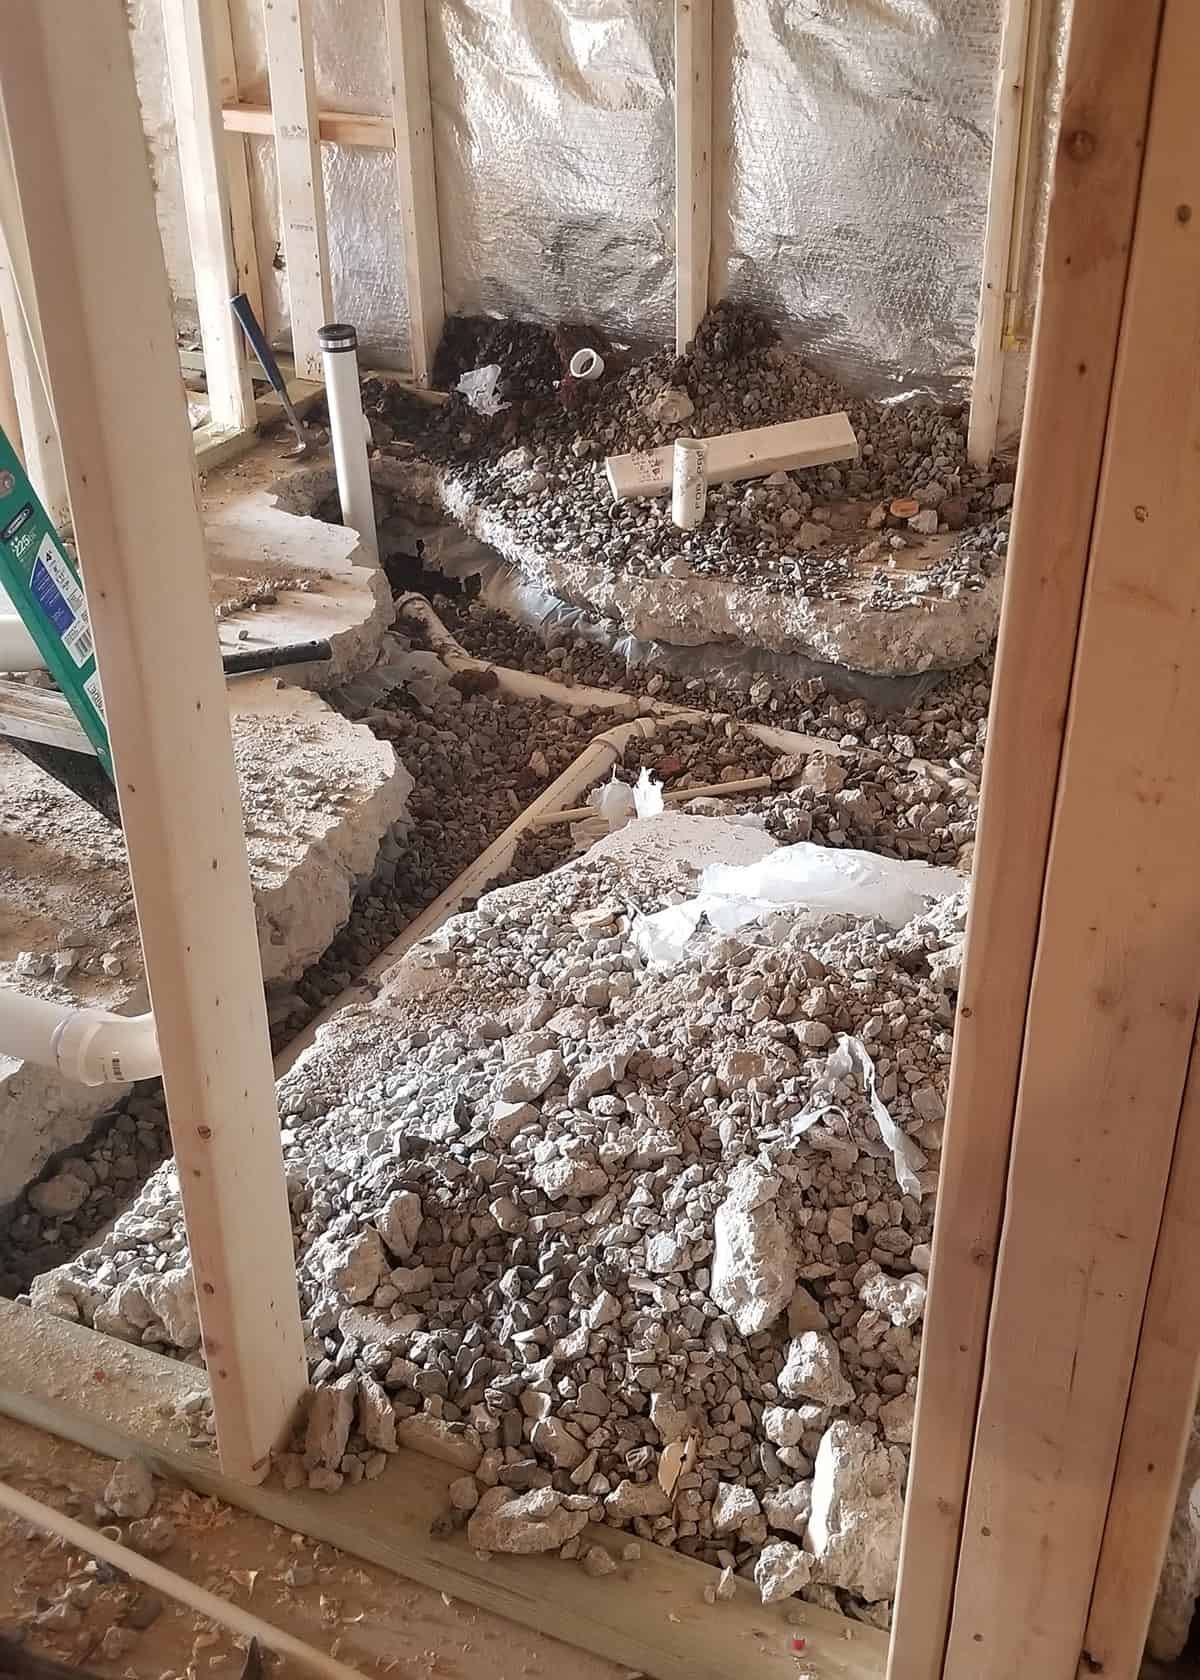 Concrete floor ripped out to reroute new plumbing for a bathroom.